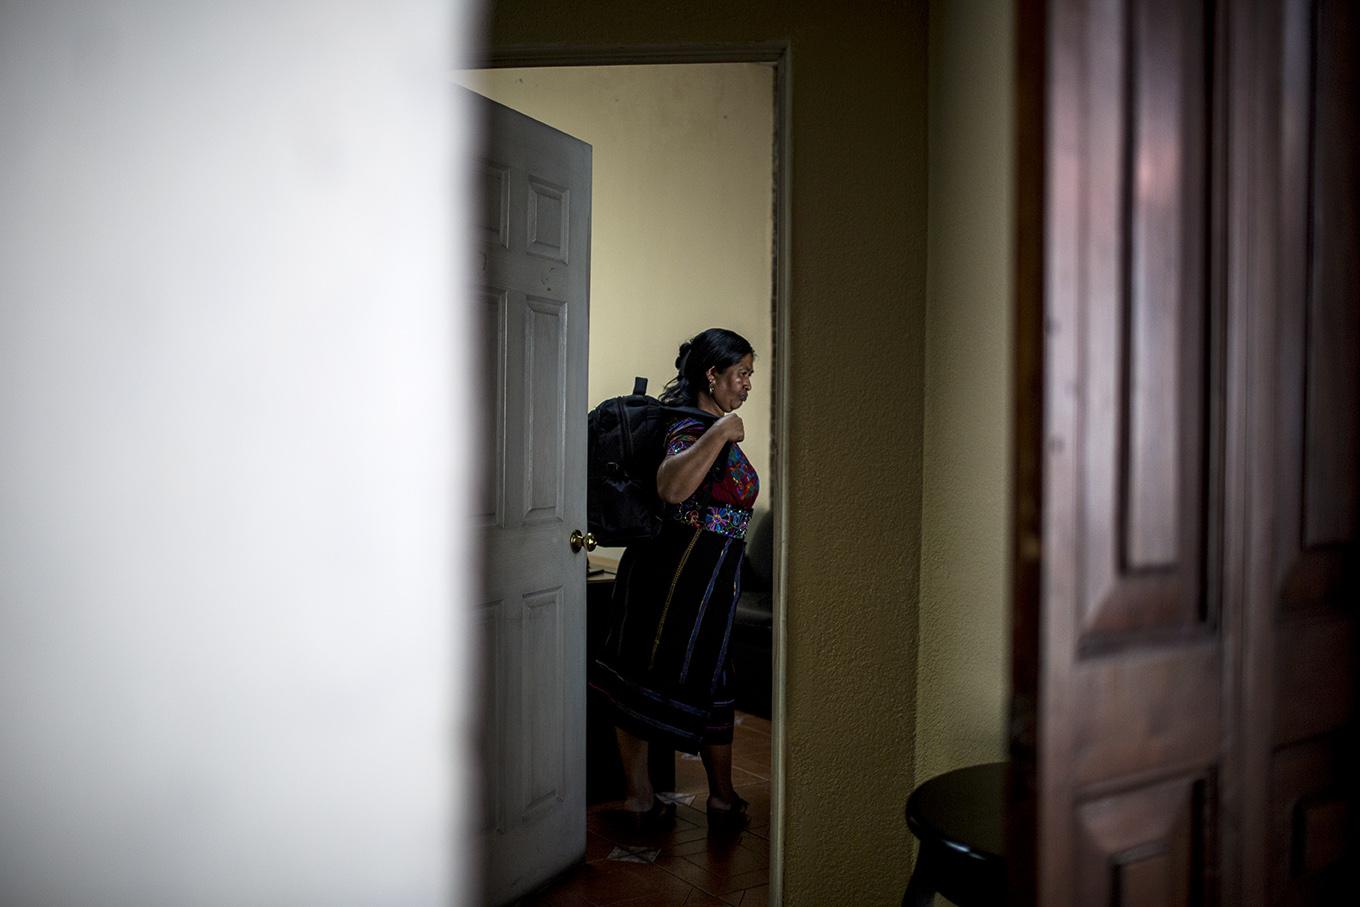 Vicenda Jerónimo picks up her backpack in her office, ready to go back to her community. Photo by: Simone Dalmasso